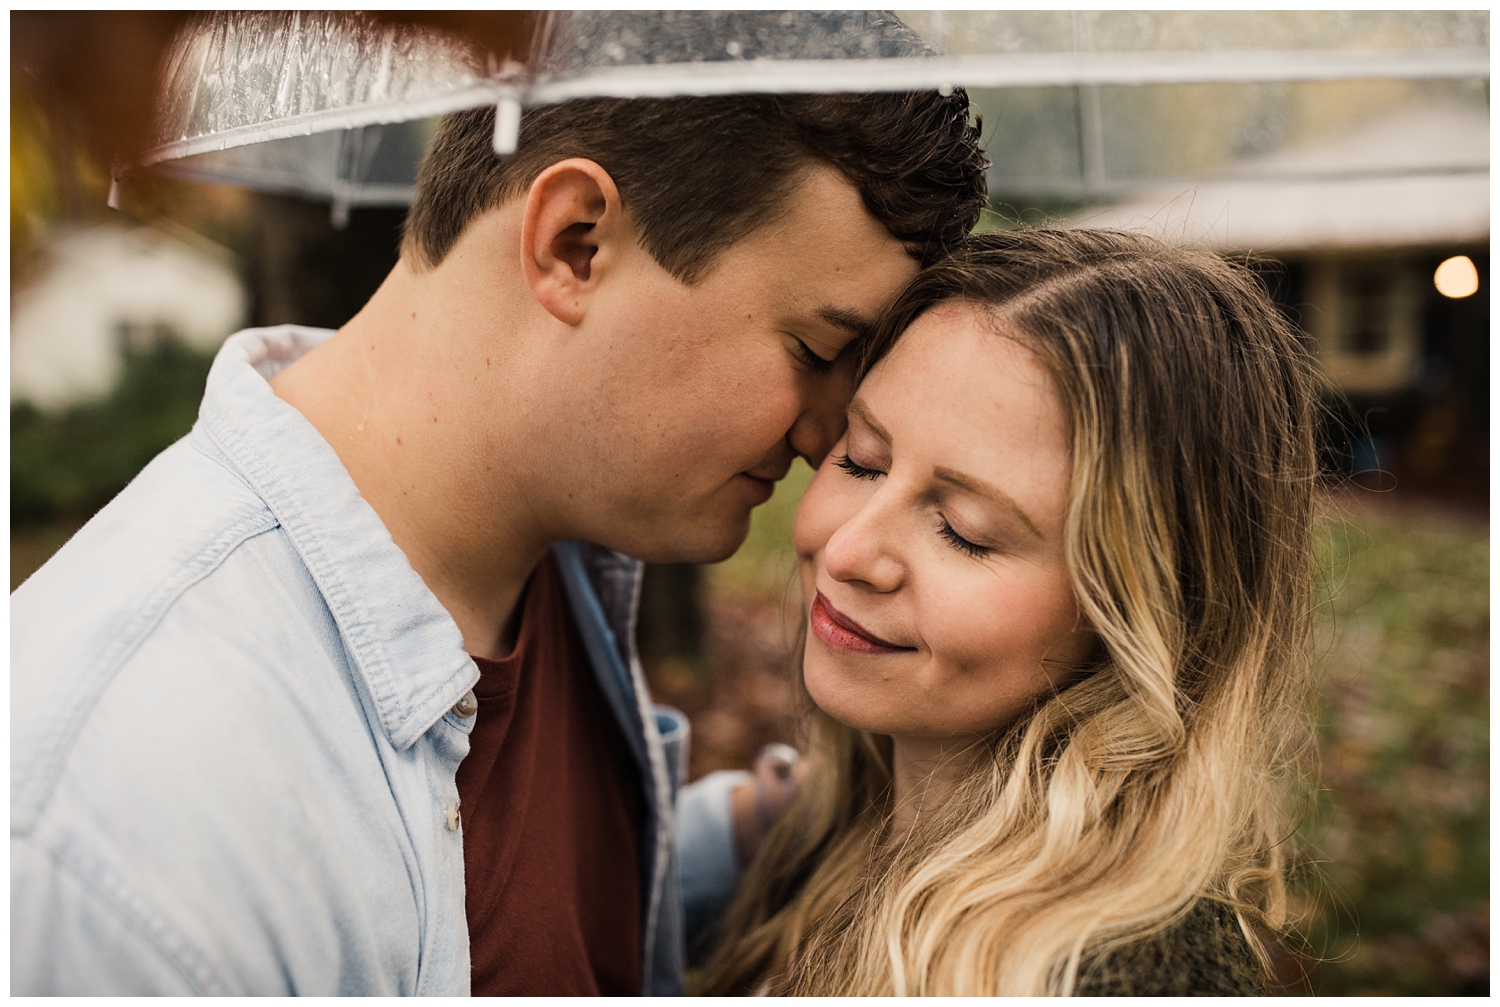 Rainy Day Engagement Session in Marietta, Georgia with cute couple standing under a clear umbrella in their front yard